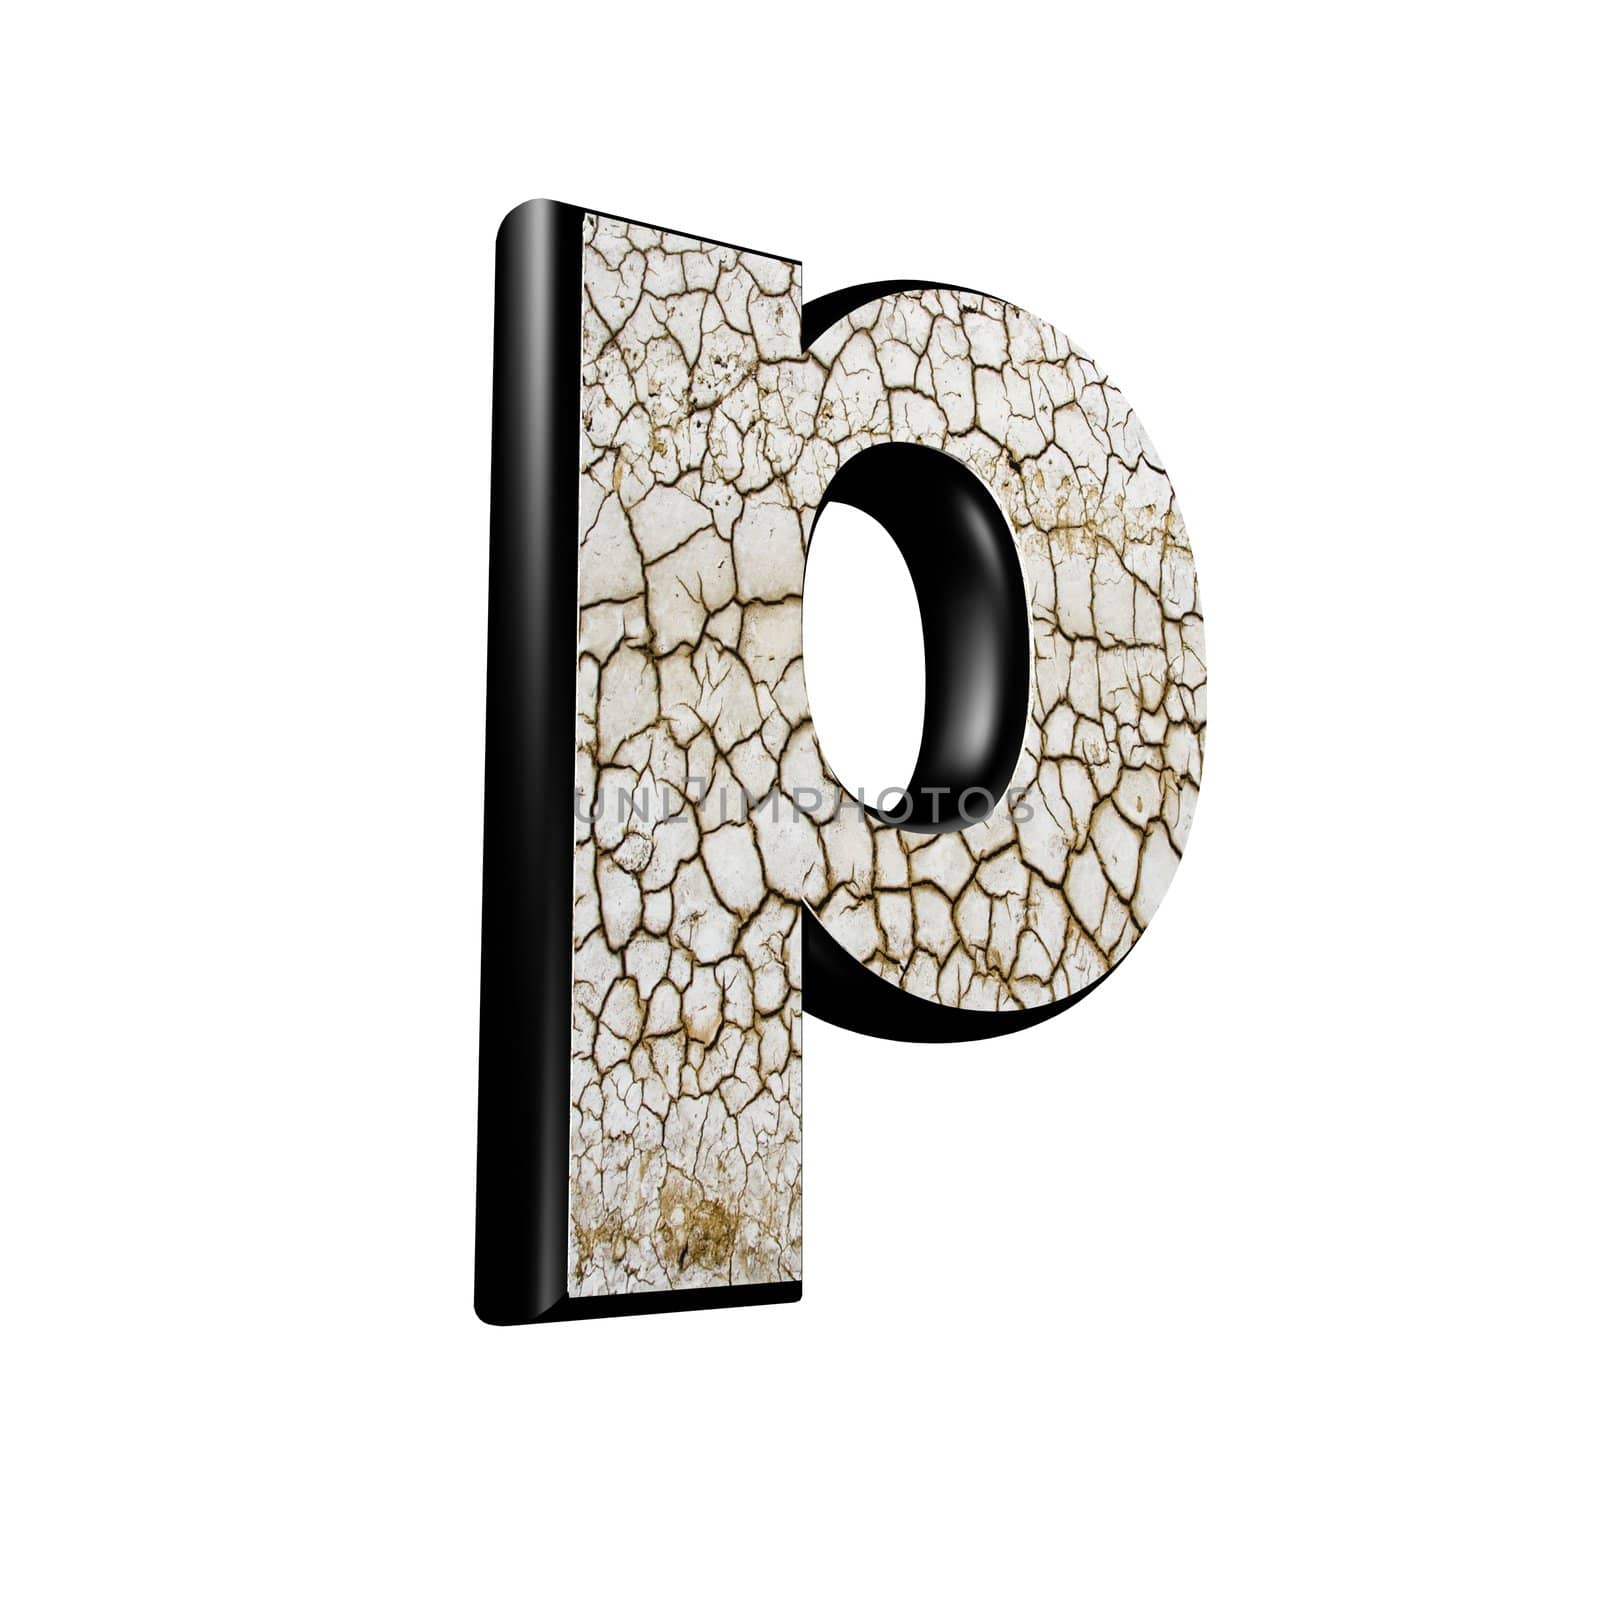 abstract 3d letter with dry ground texture - P by chrisroll